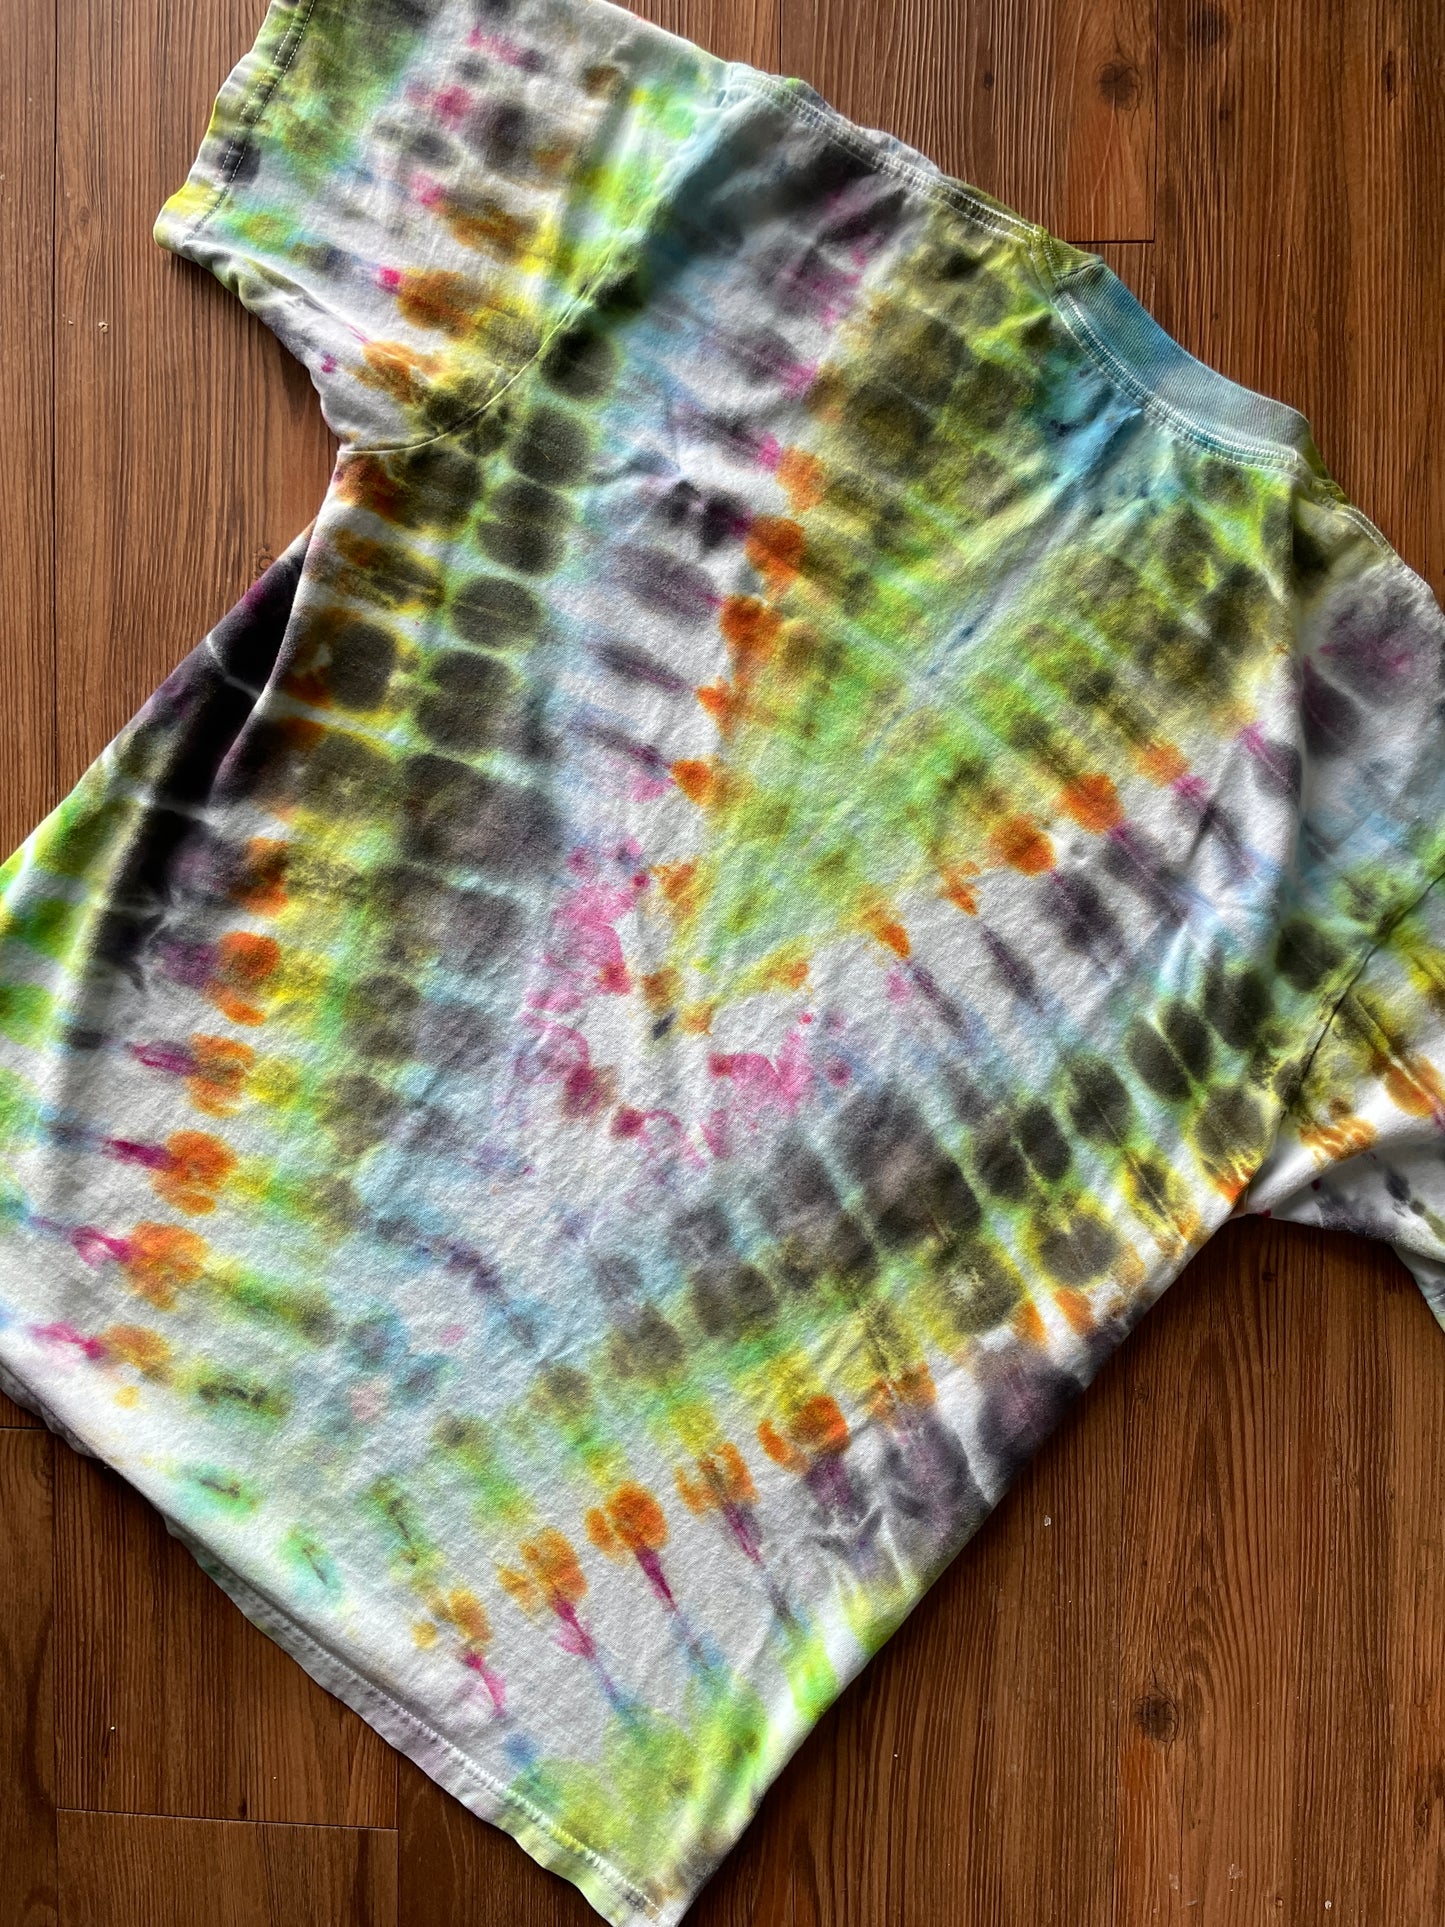 XL Men’s Rainbow and Black V-Pleated Handmade Tie Dye T-Shirt | One-Of-a-Kind Multicolor Snow Dyed Short Sleeve